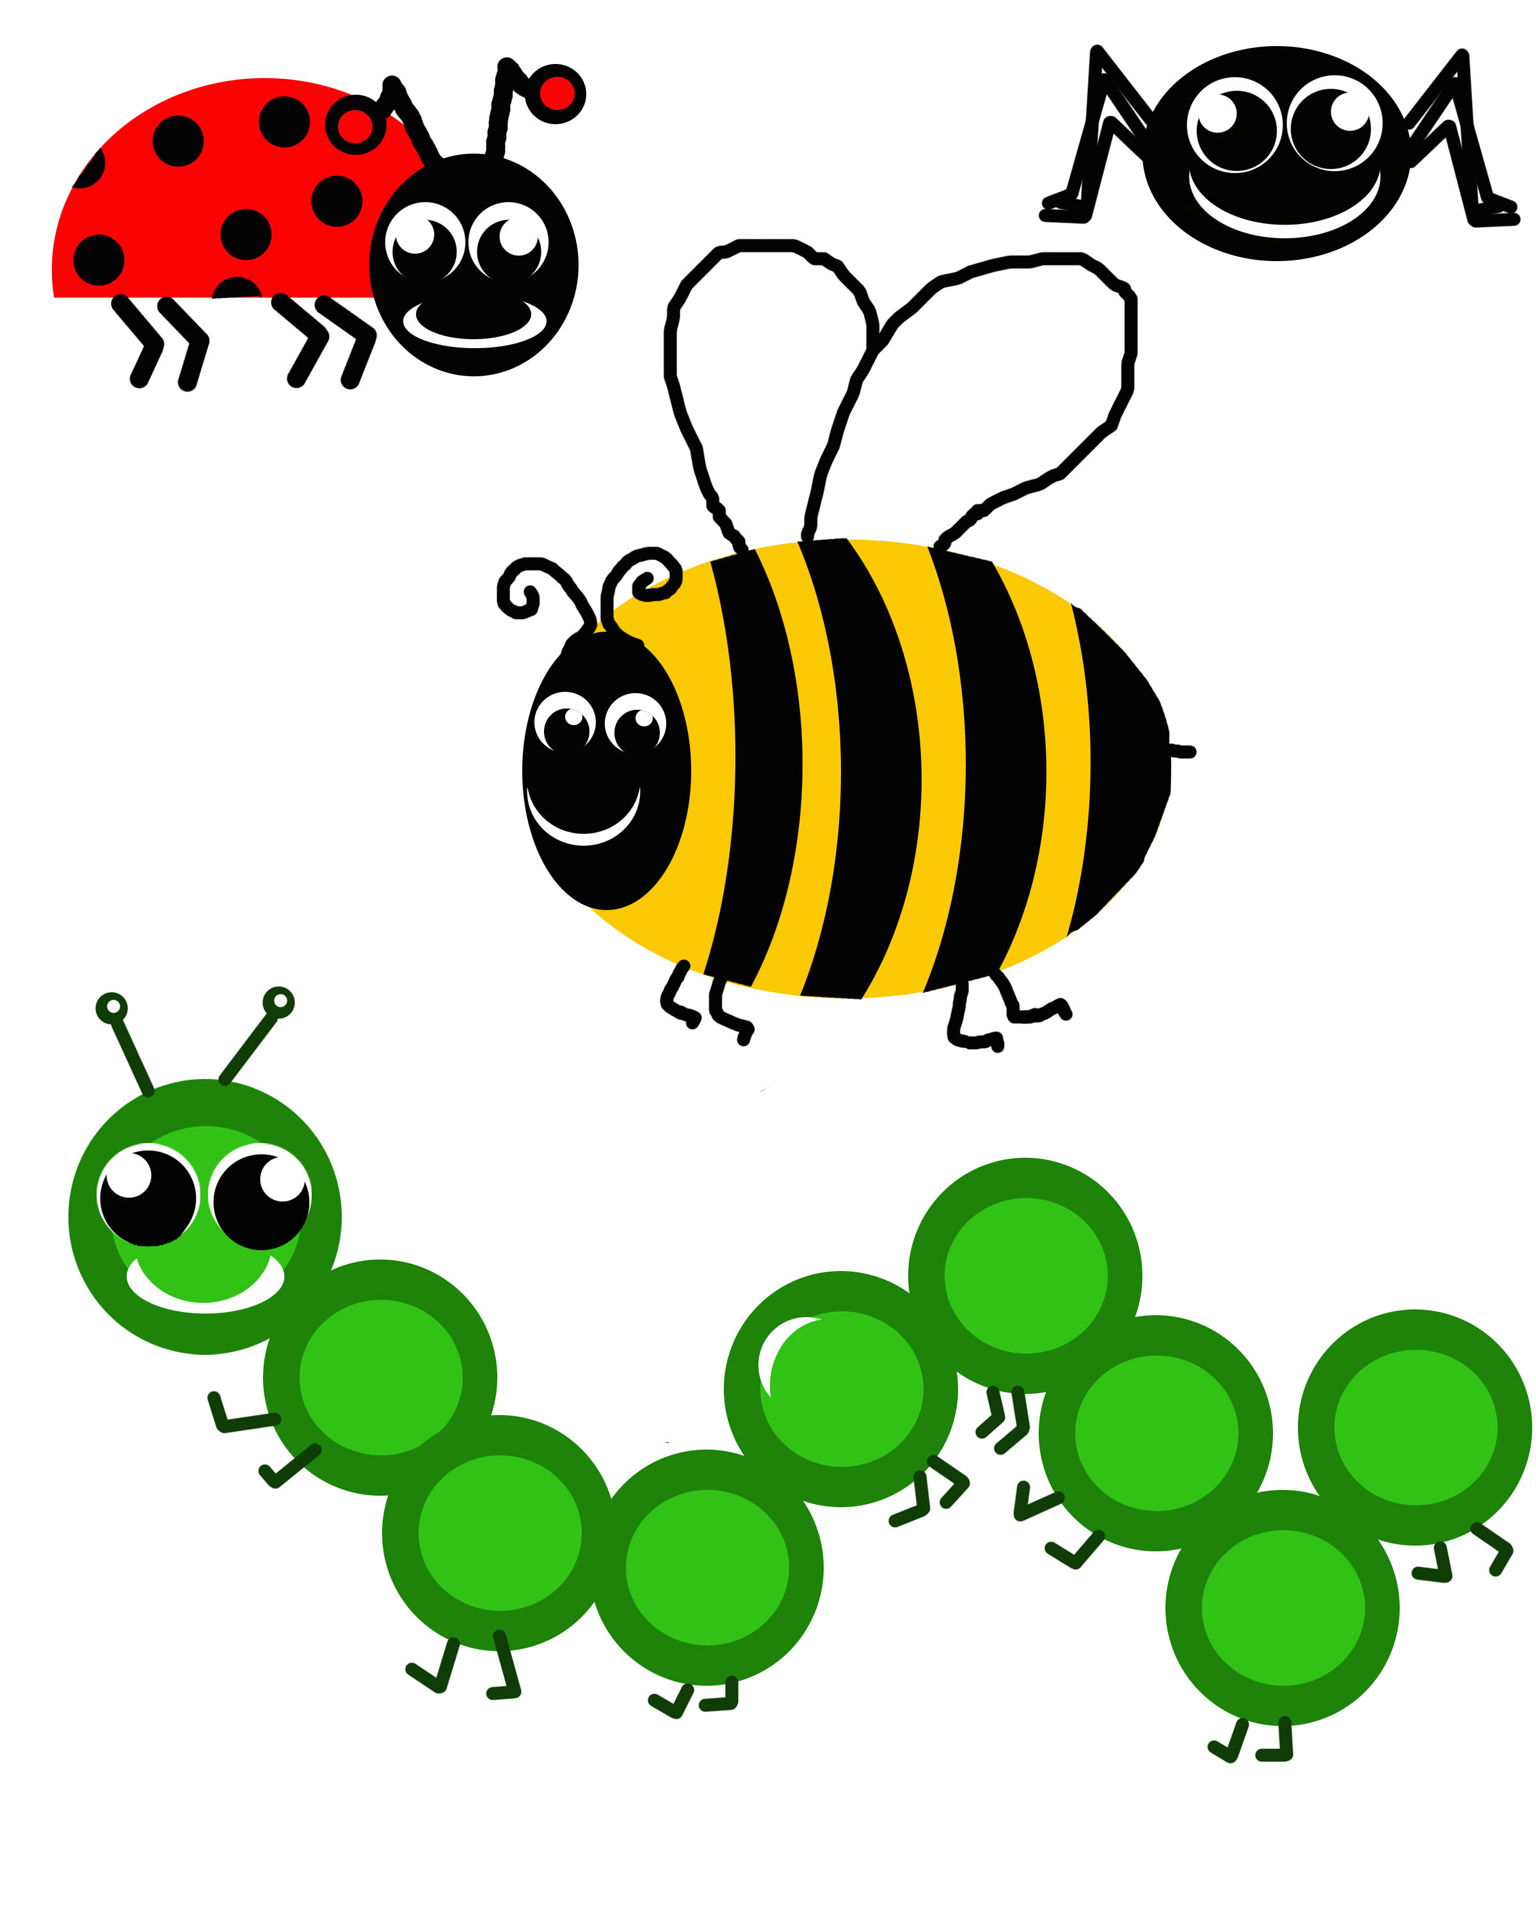 Lady Bug Clip Art At Clker Co